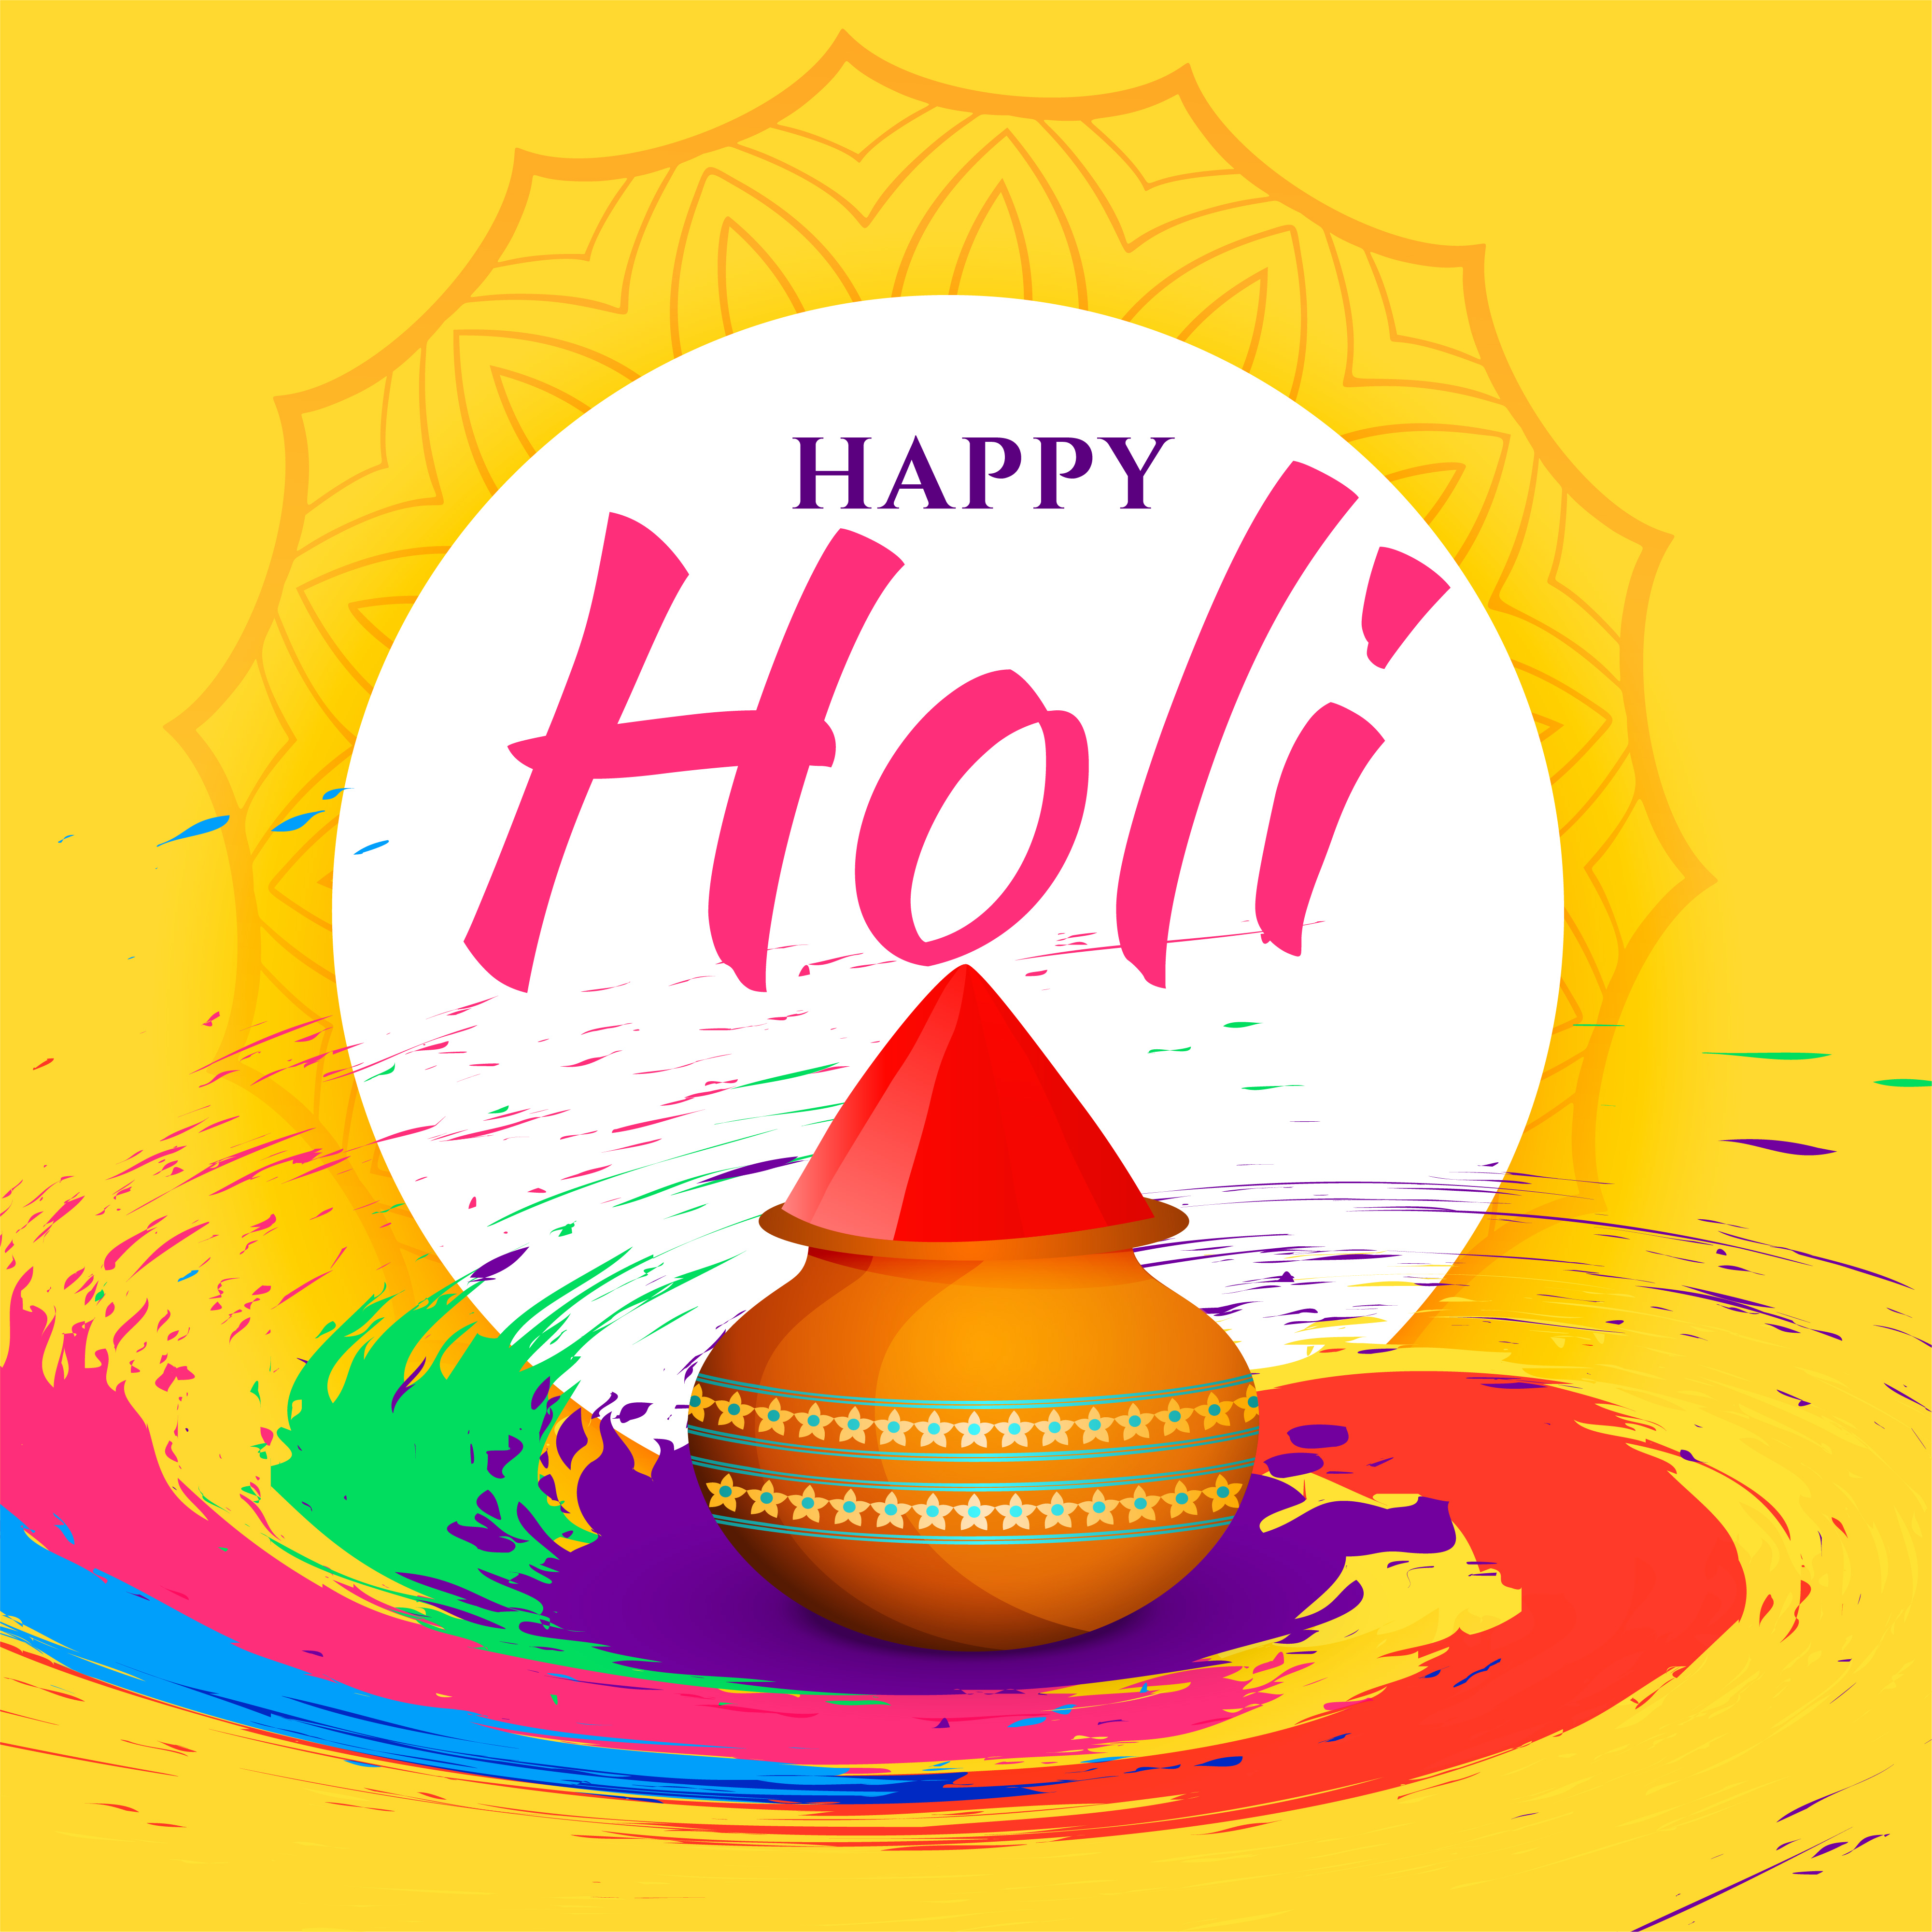 Abstract Colorful Happy Holi Festival Background Download Free Vector